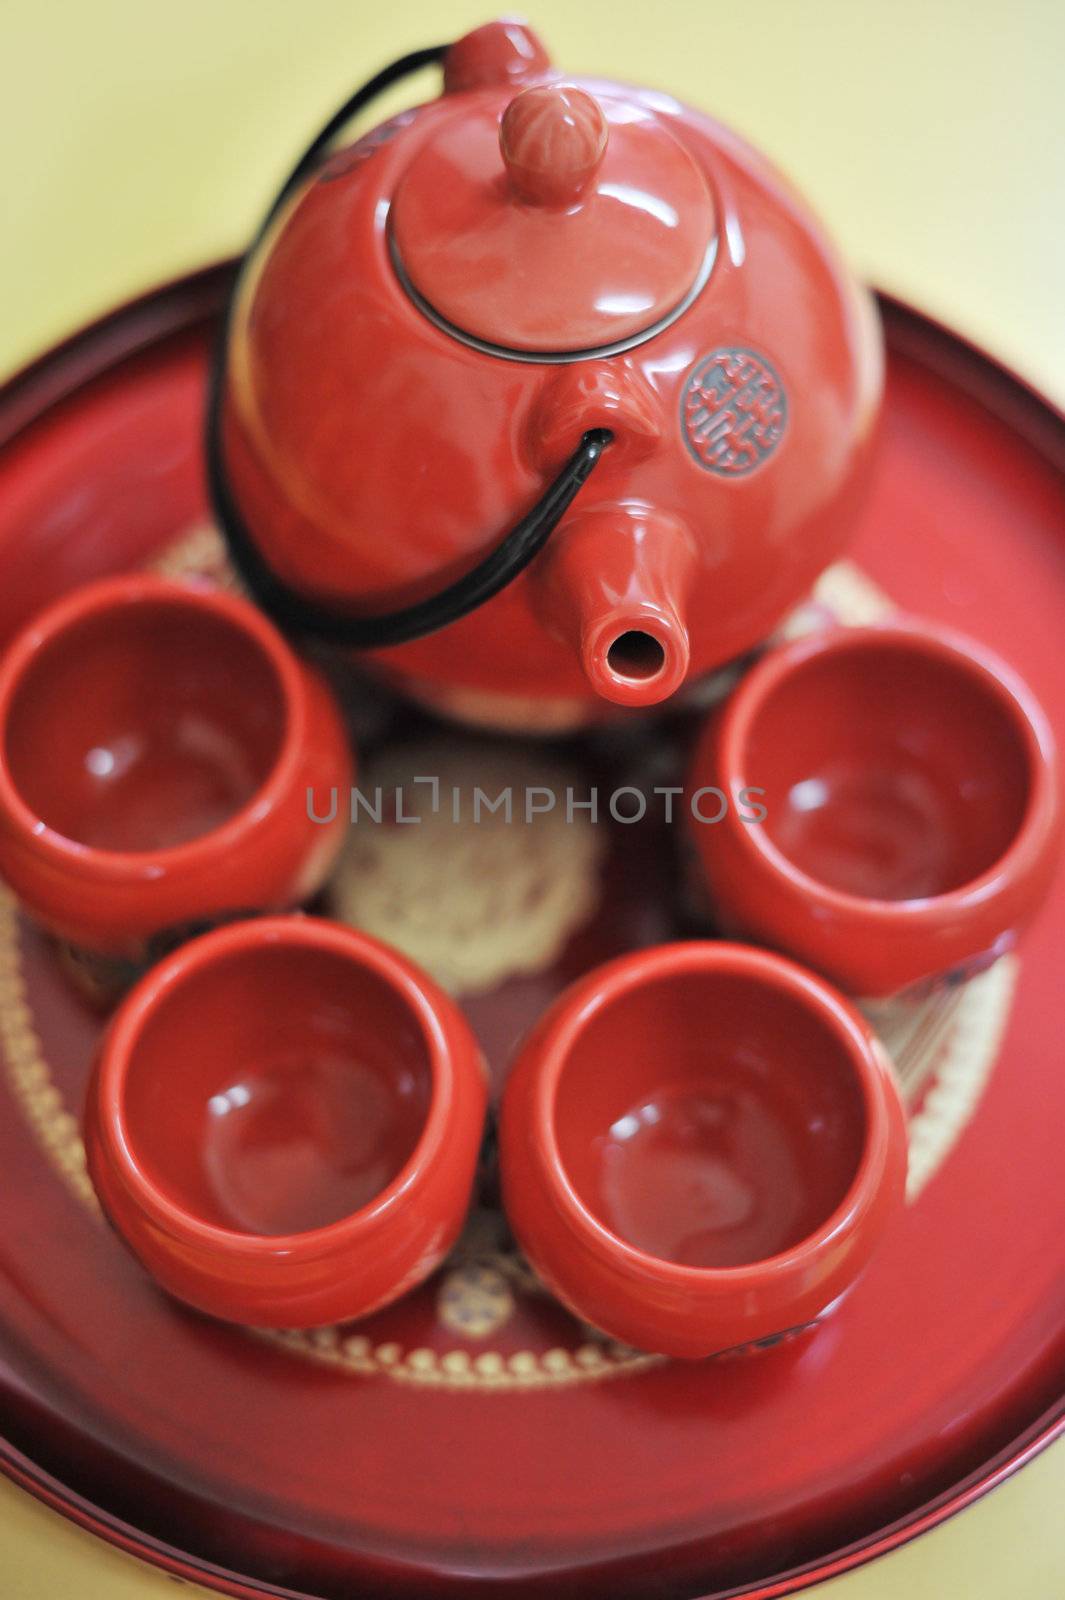 Chinese ceramic tea set and cups, the Chinese word on teapot mean double happiness